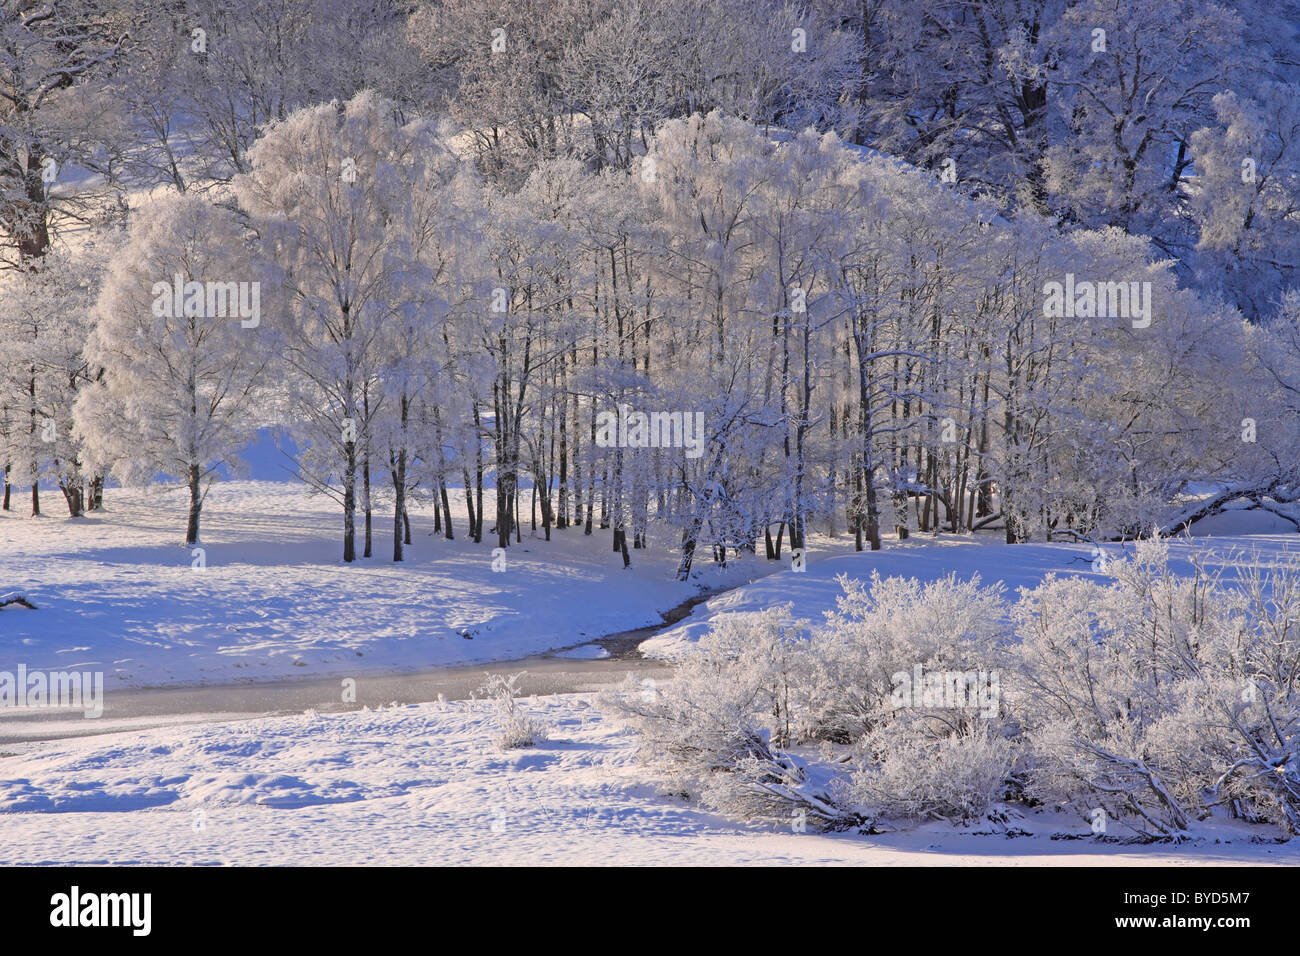 UK Scotland Tayside Perthshire The Tay valley and winter snow and frosted trees Stock Photo